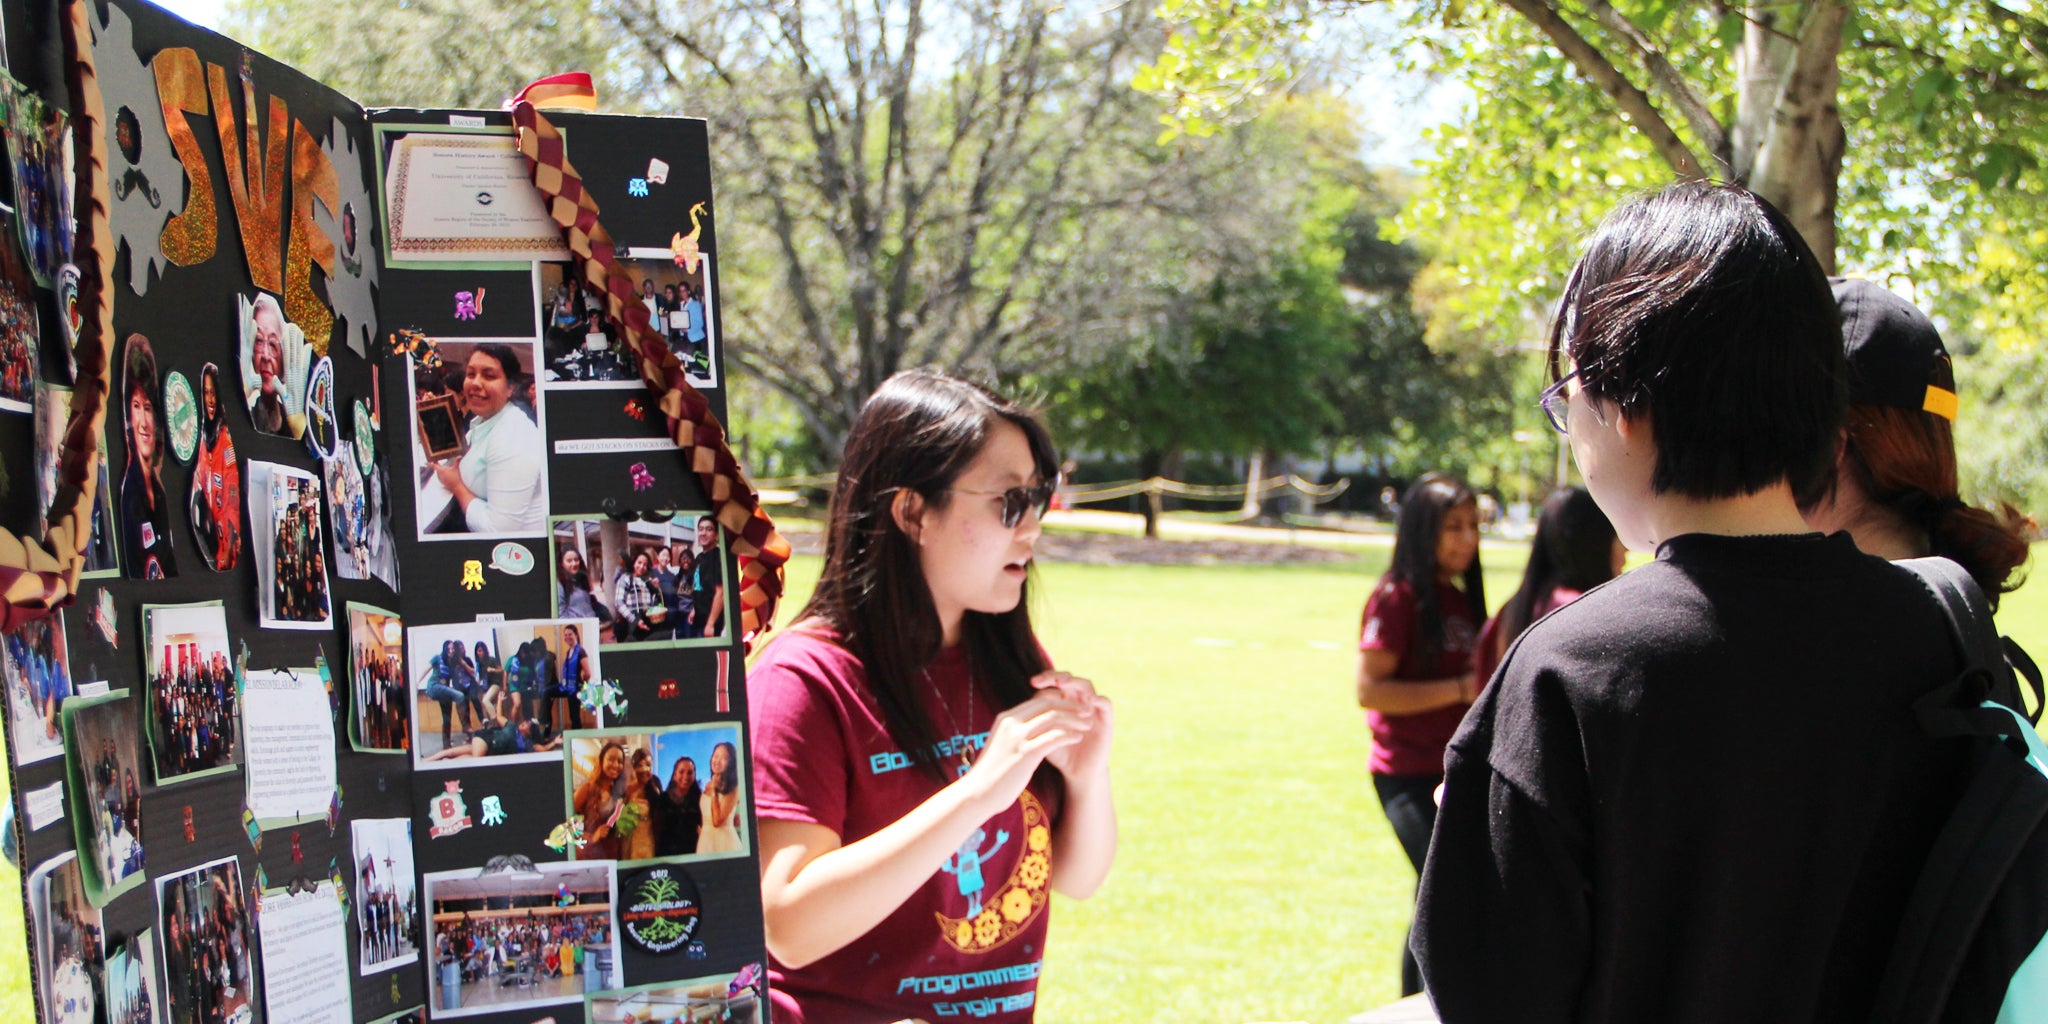 A member of a campus organization talks with students at a tabling event.